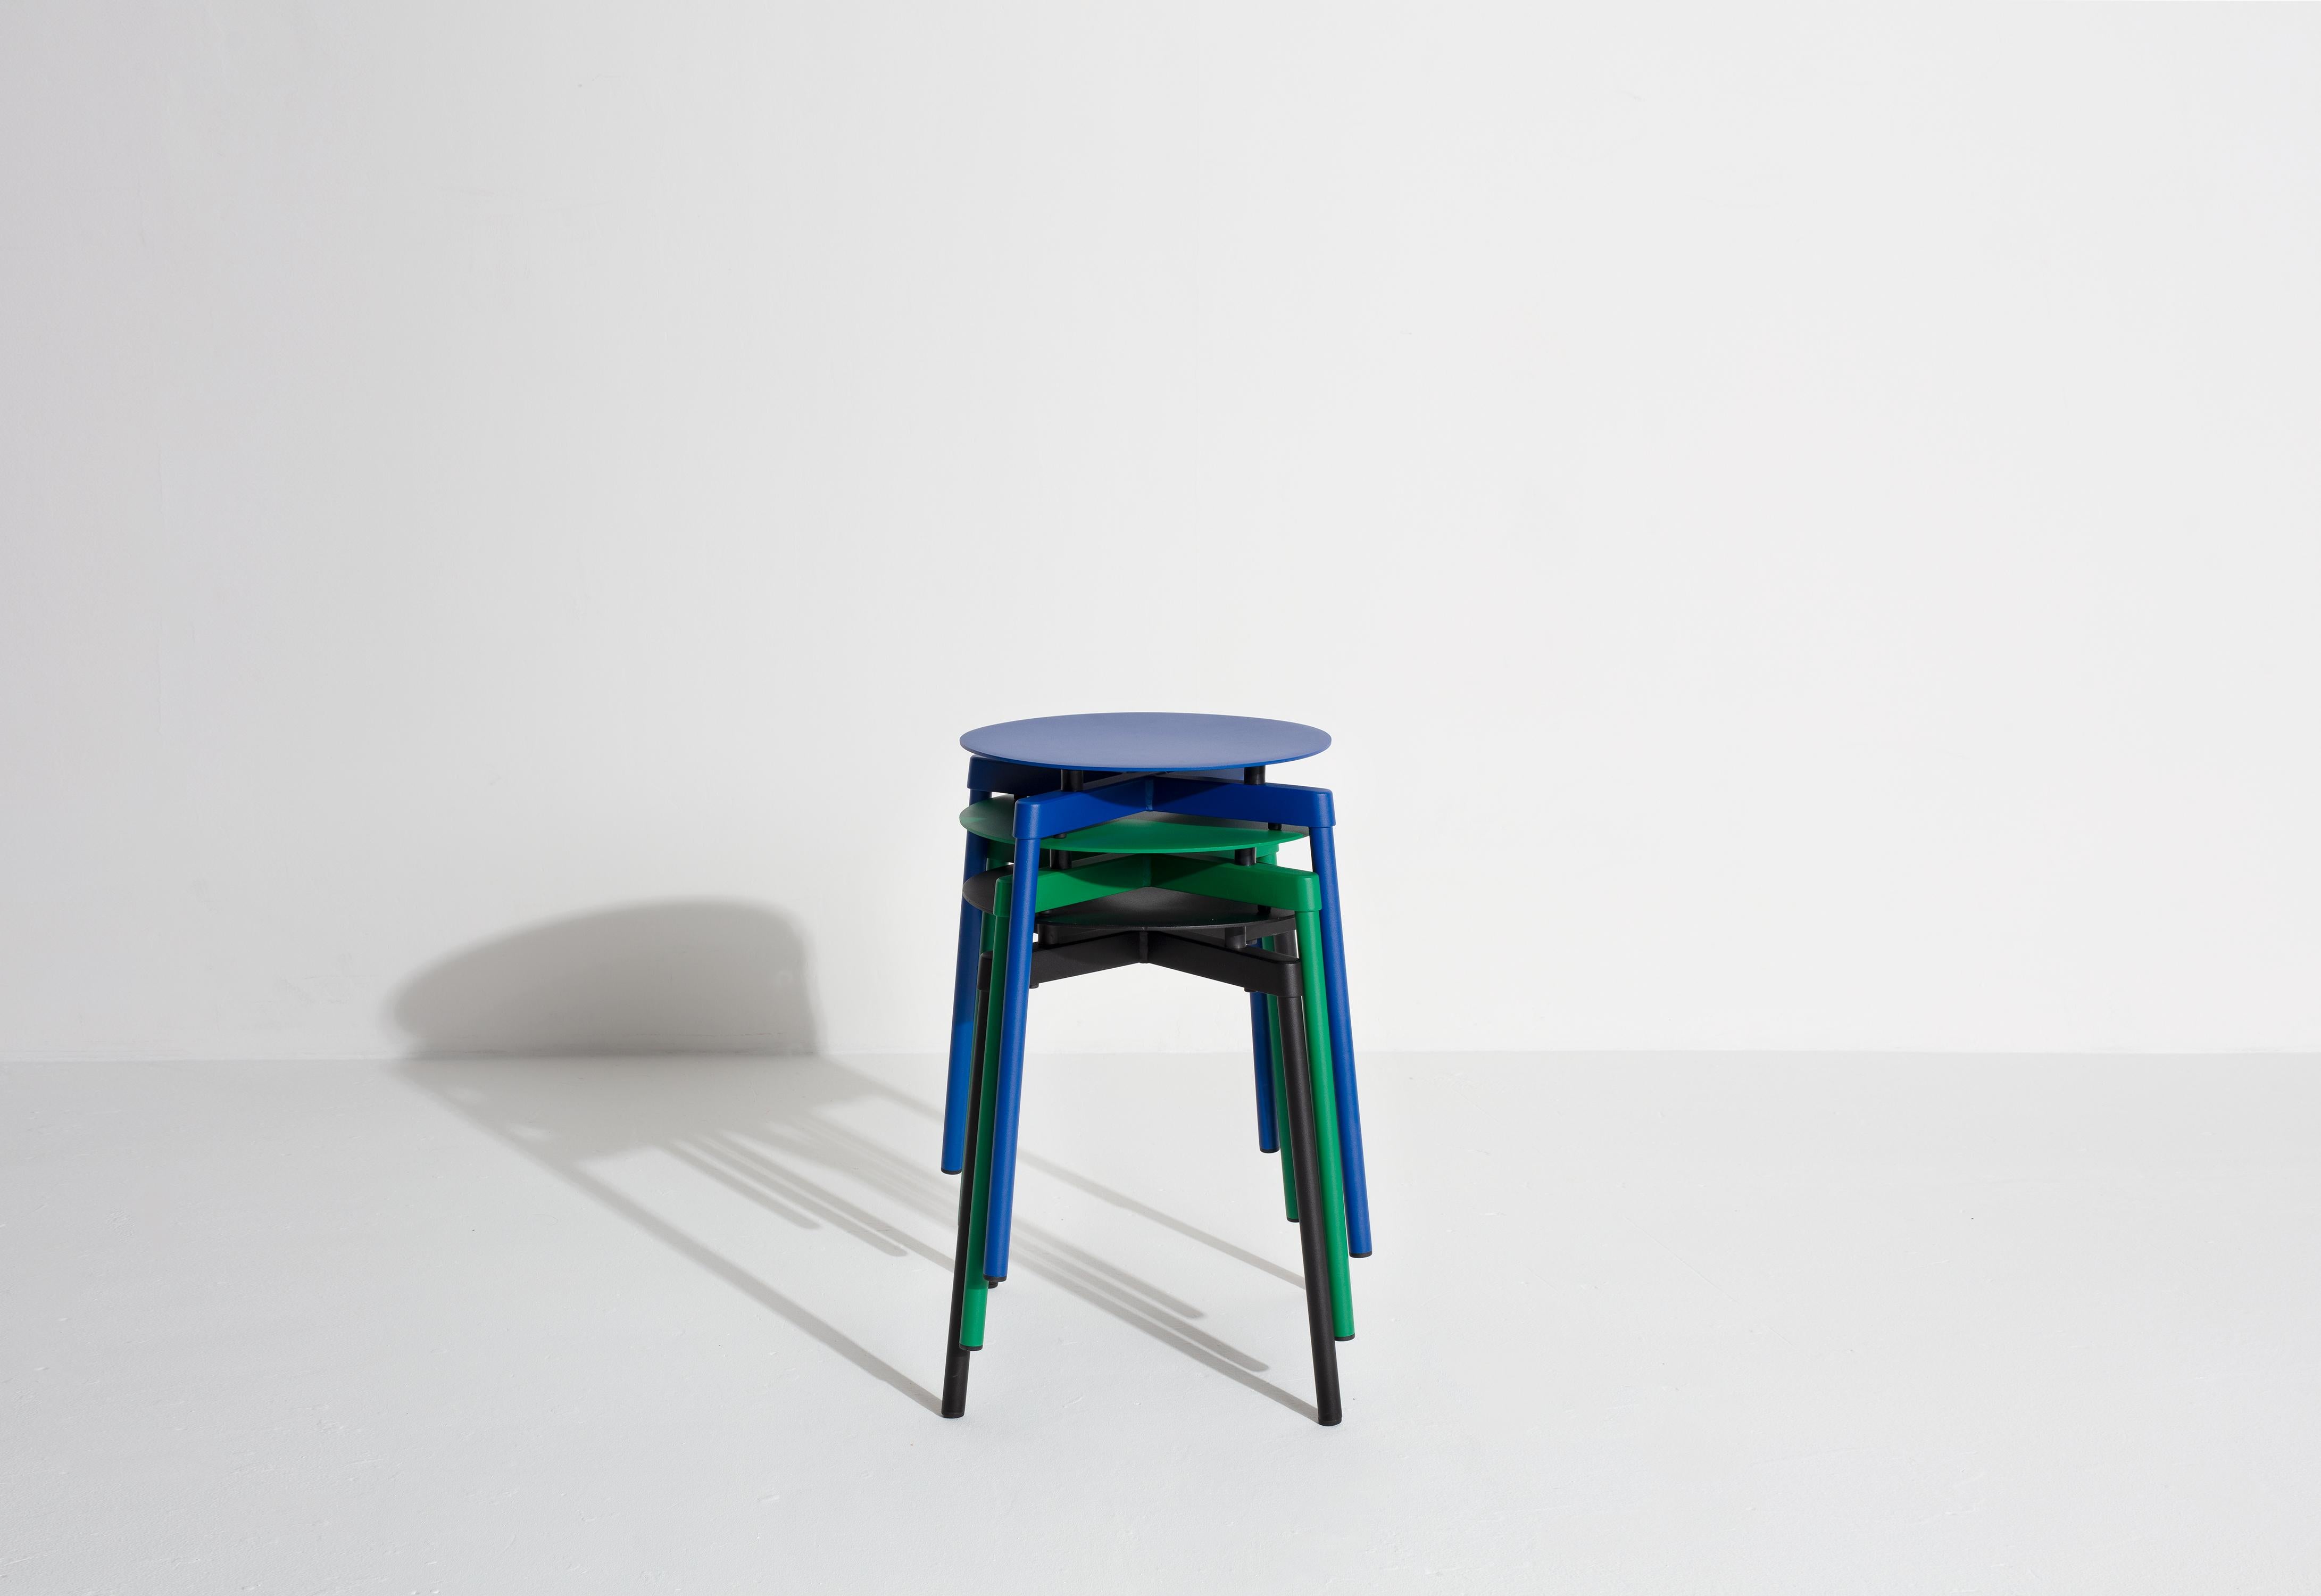 Petite Friture Fromme Stool in Mint-Green Aluminium by Tom Chung, 2020 For Sale 3